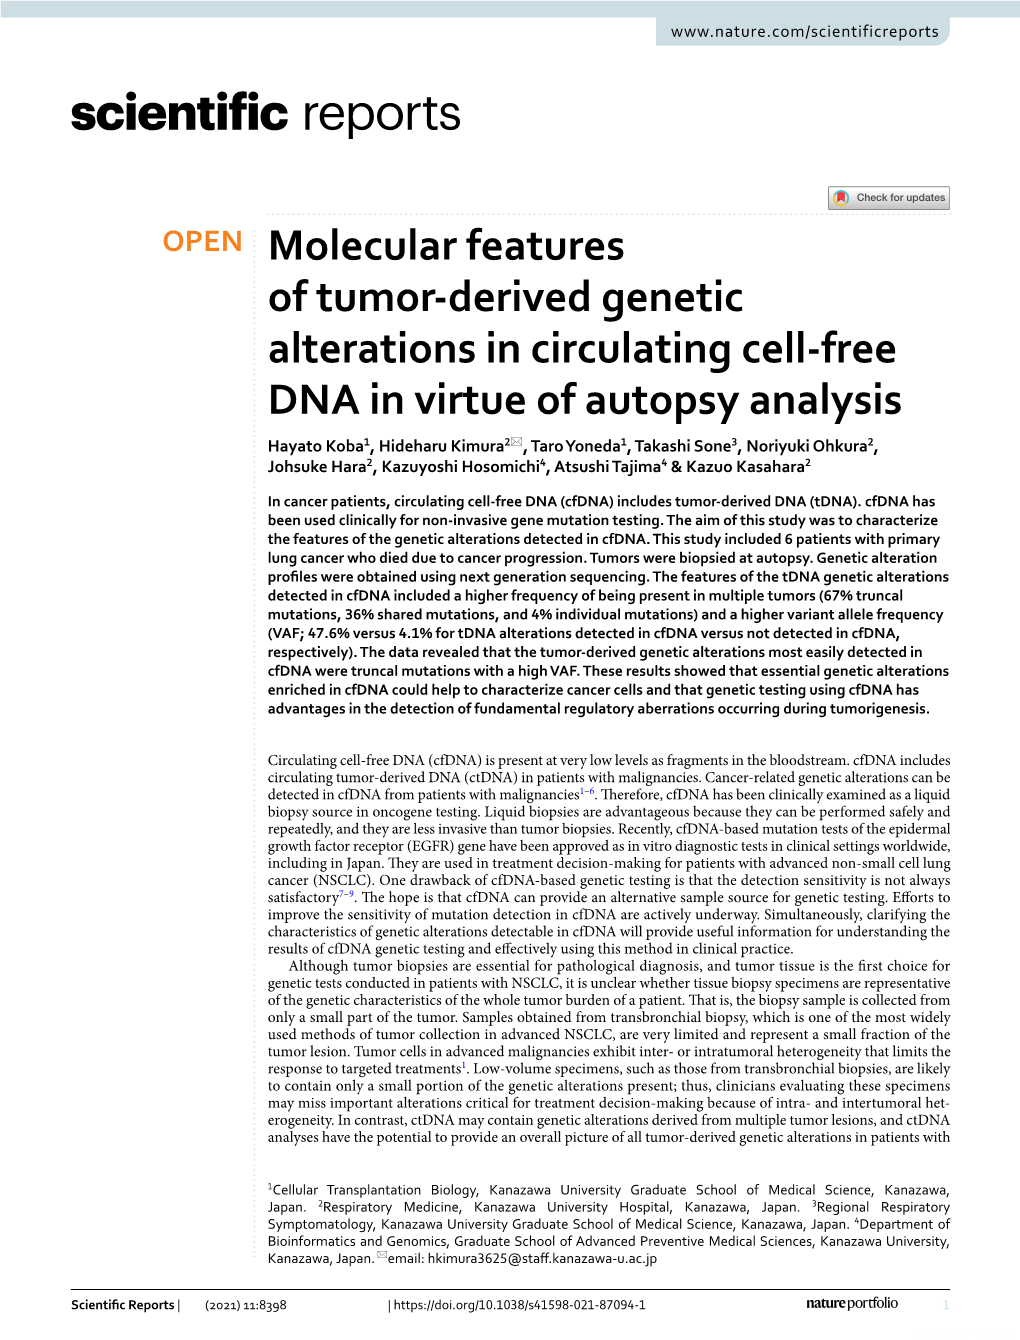 Molecular Features of Tumor-Derived Genetic Alterations in Circulating Cell